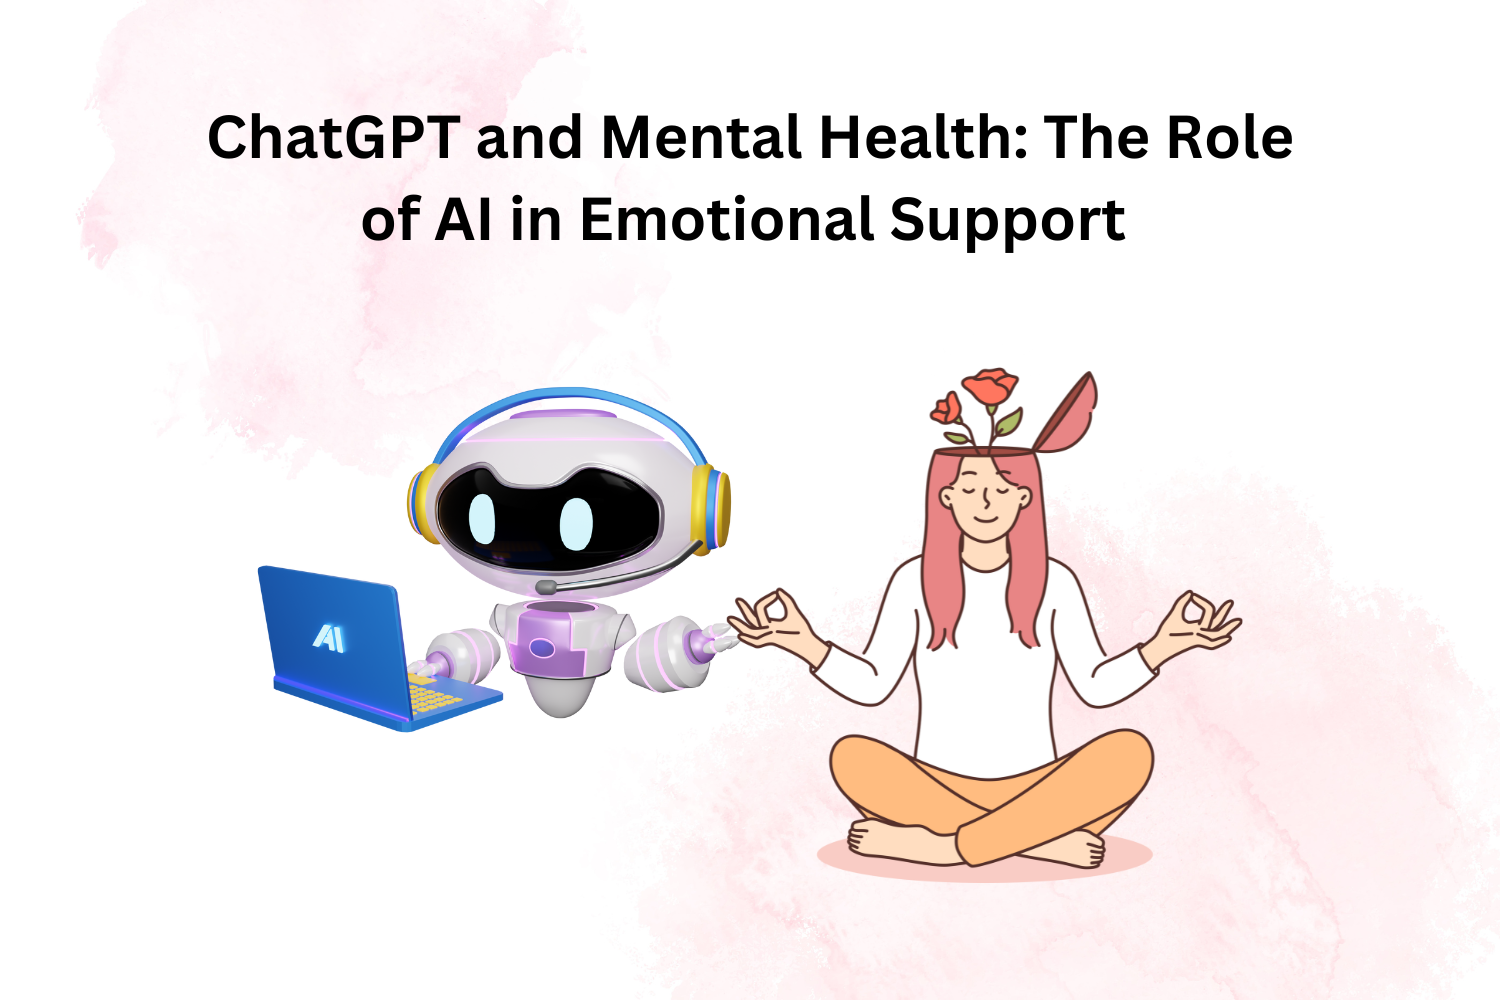 ChatGPT and Mental Health: The Role of AI in Emotional Support